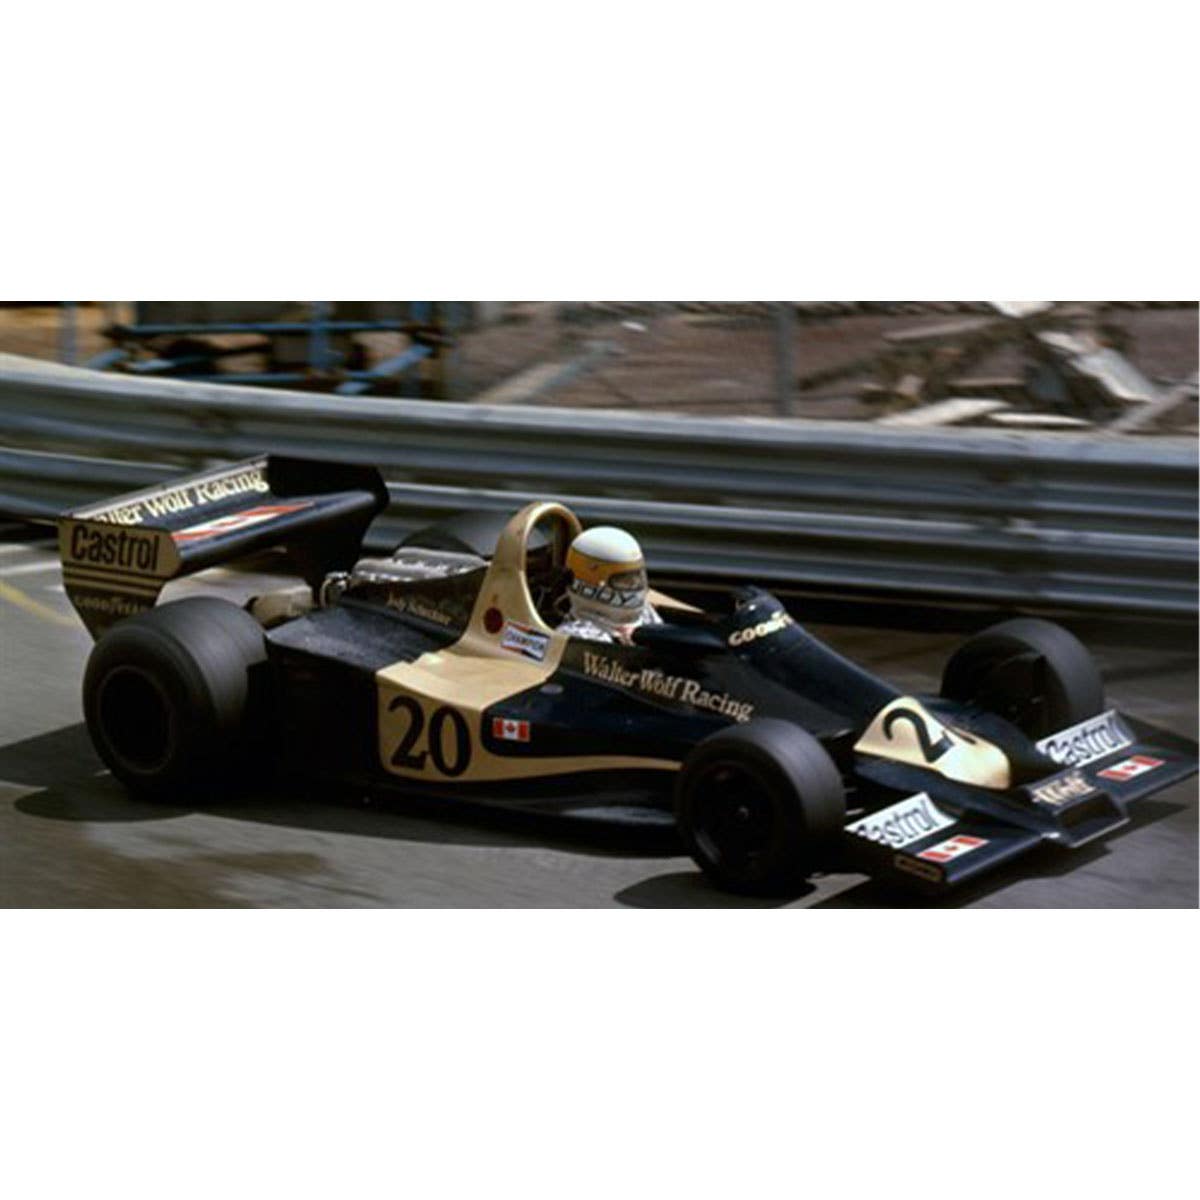 Wolf WR1 No.20 Winner Monaco GP 1977 - Jody Scheckter - With Acrylic Cover - 1:18 Scale Resin Model Car